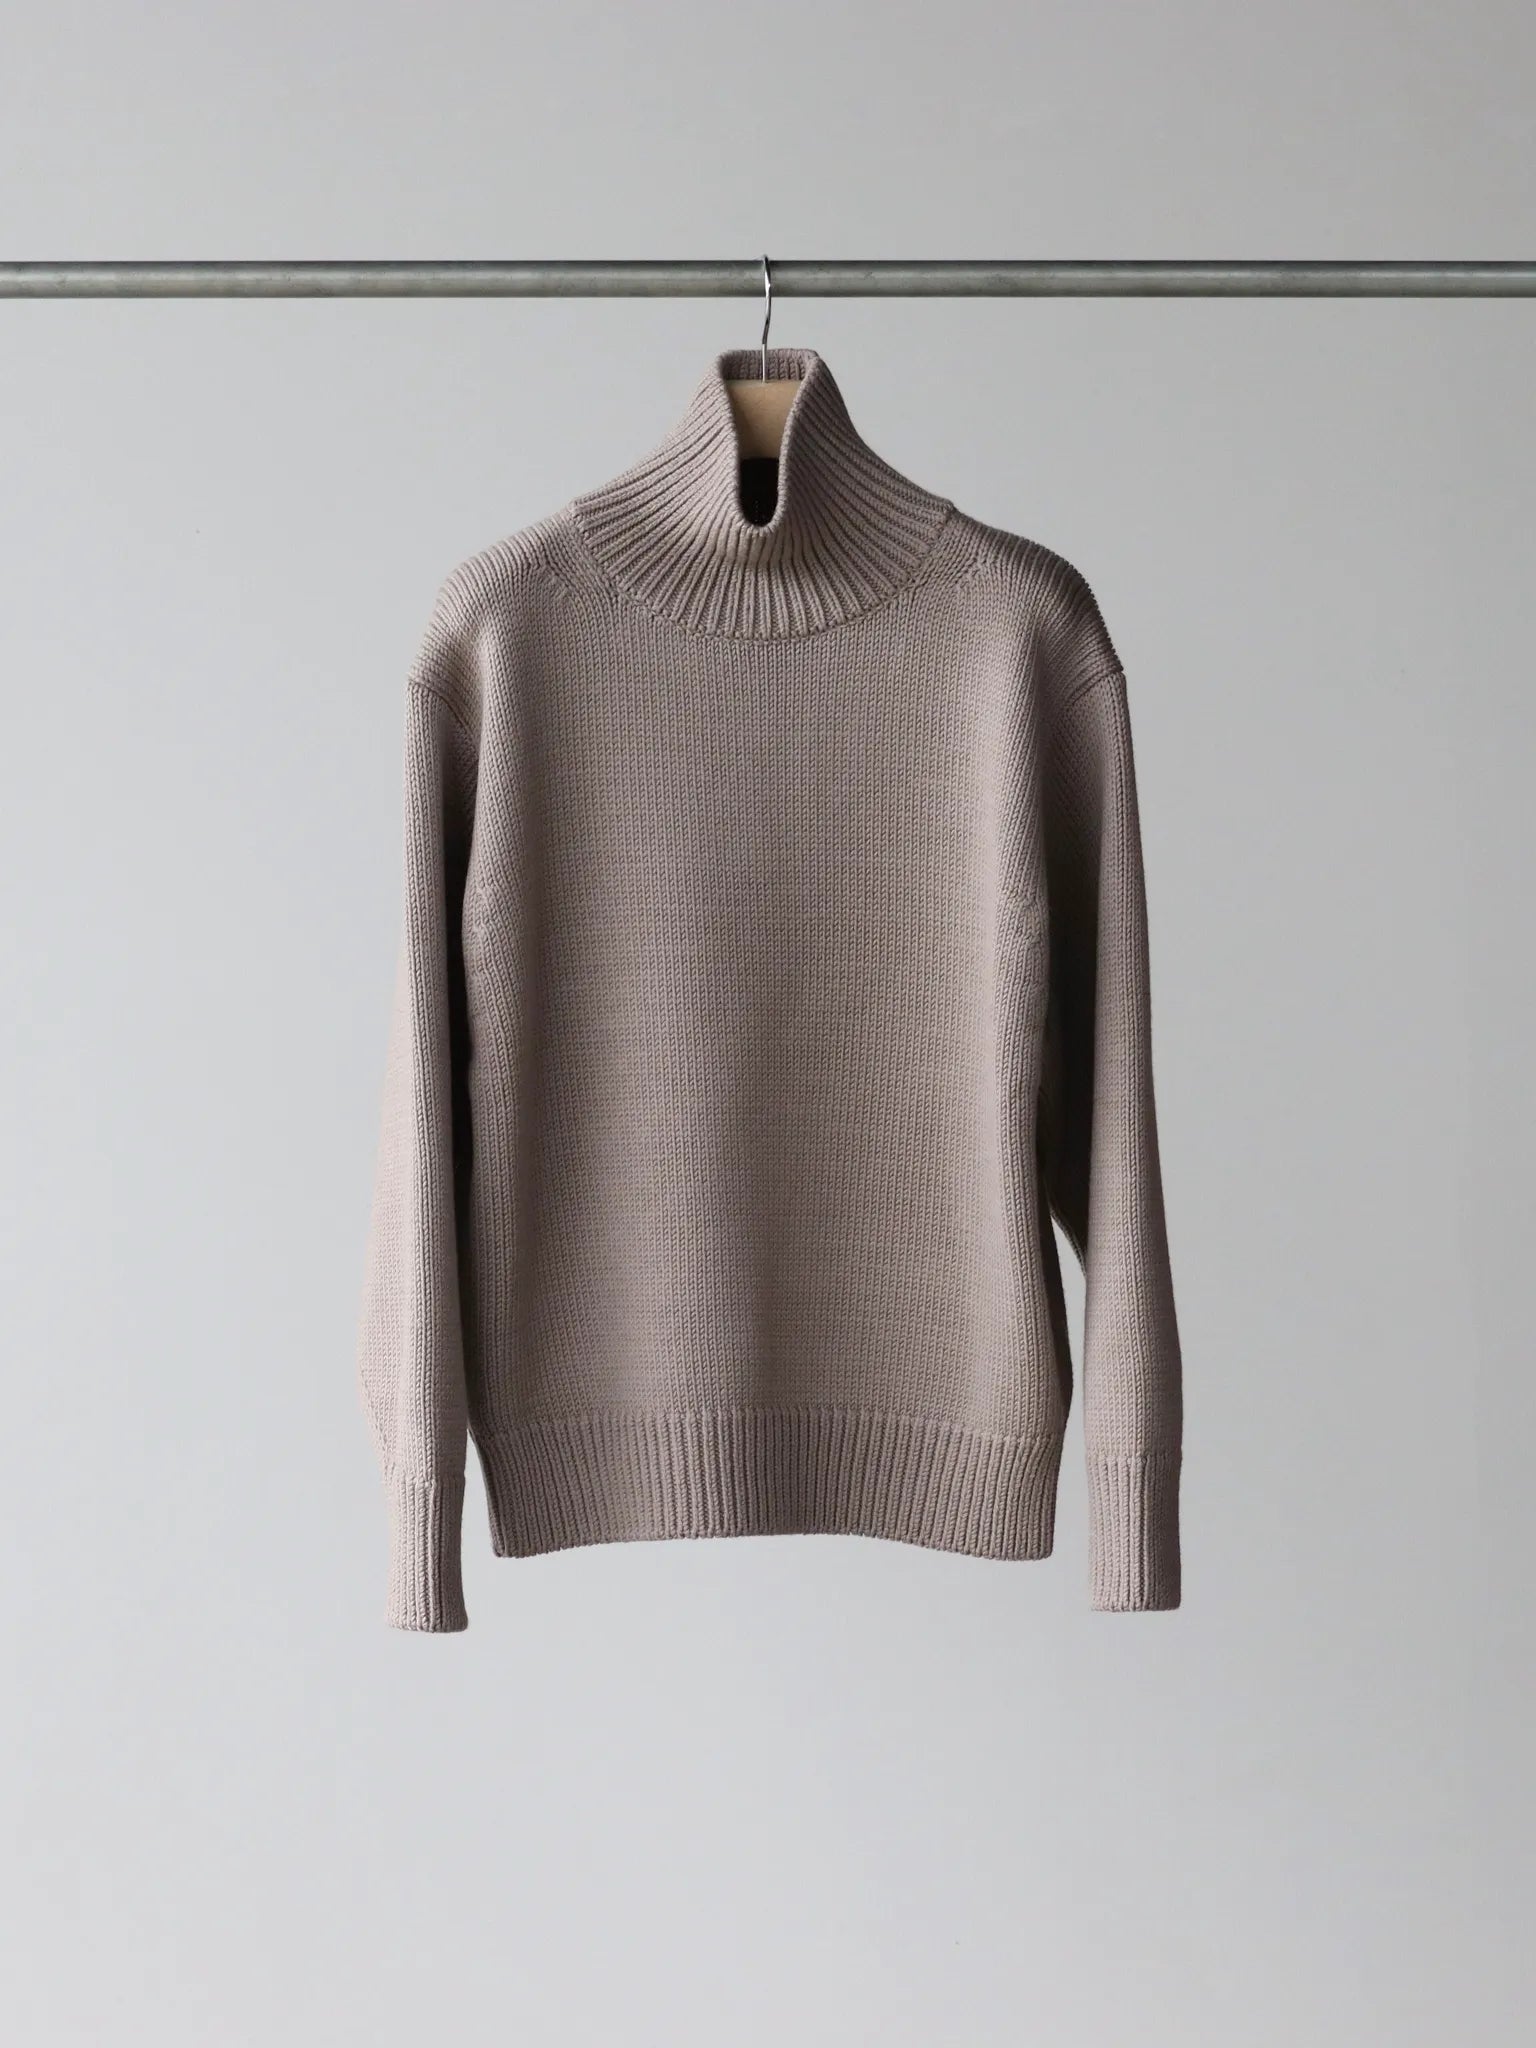 olde-h-daughter-wool-turtle-neck-p-o-duskee-1